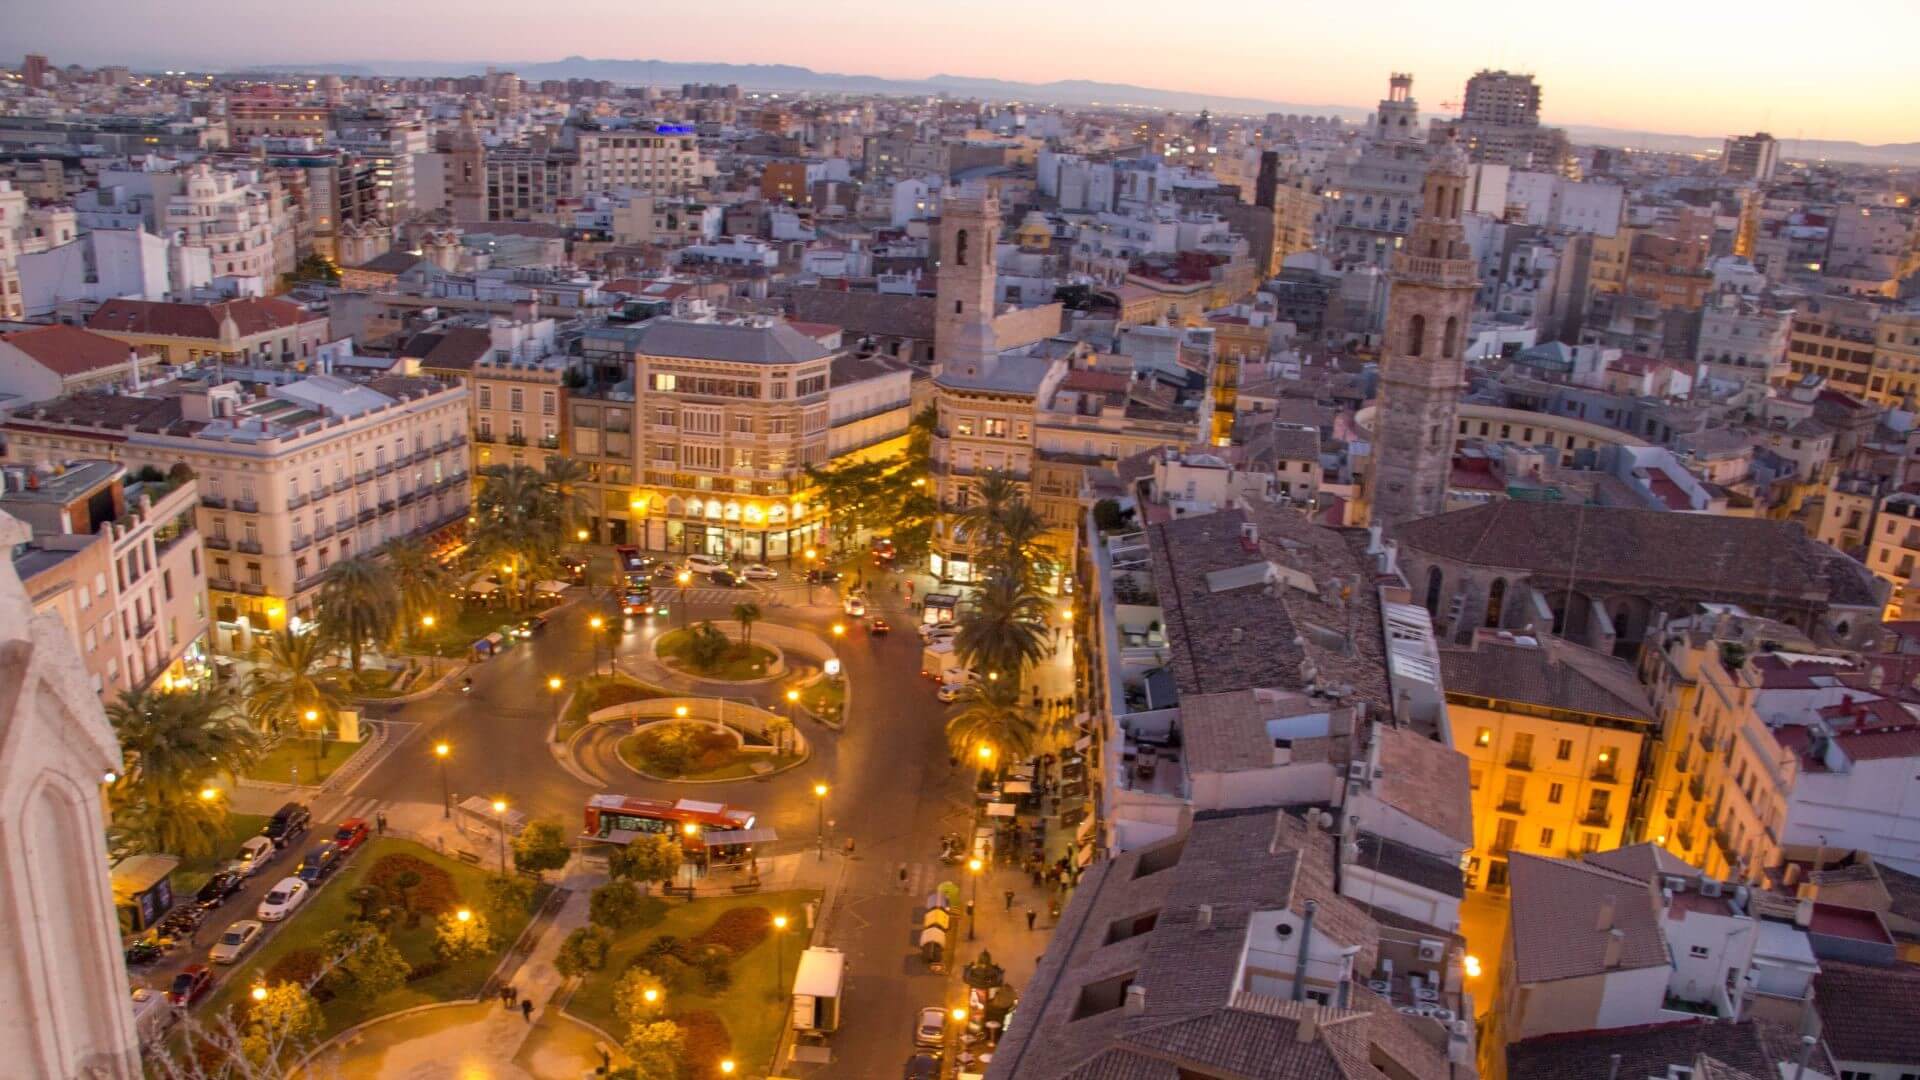 Aerial view of Valencia town at dusk